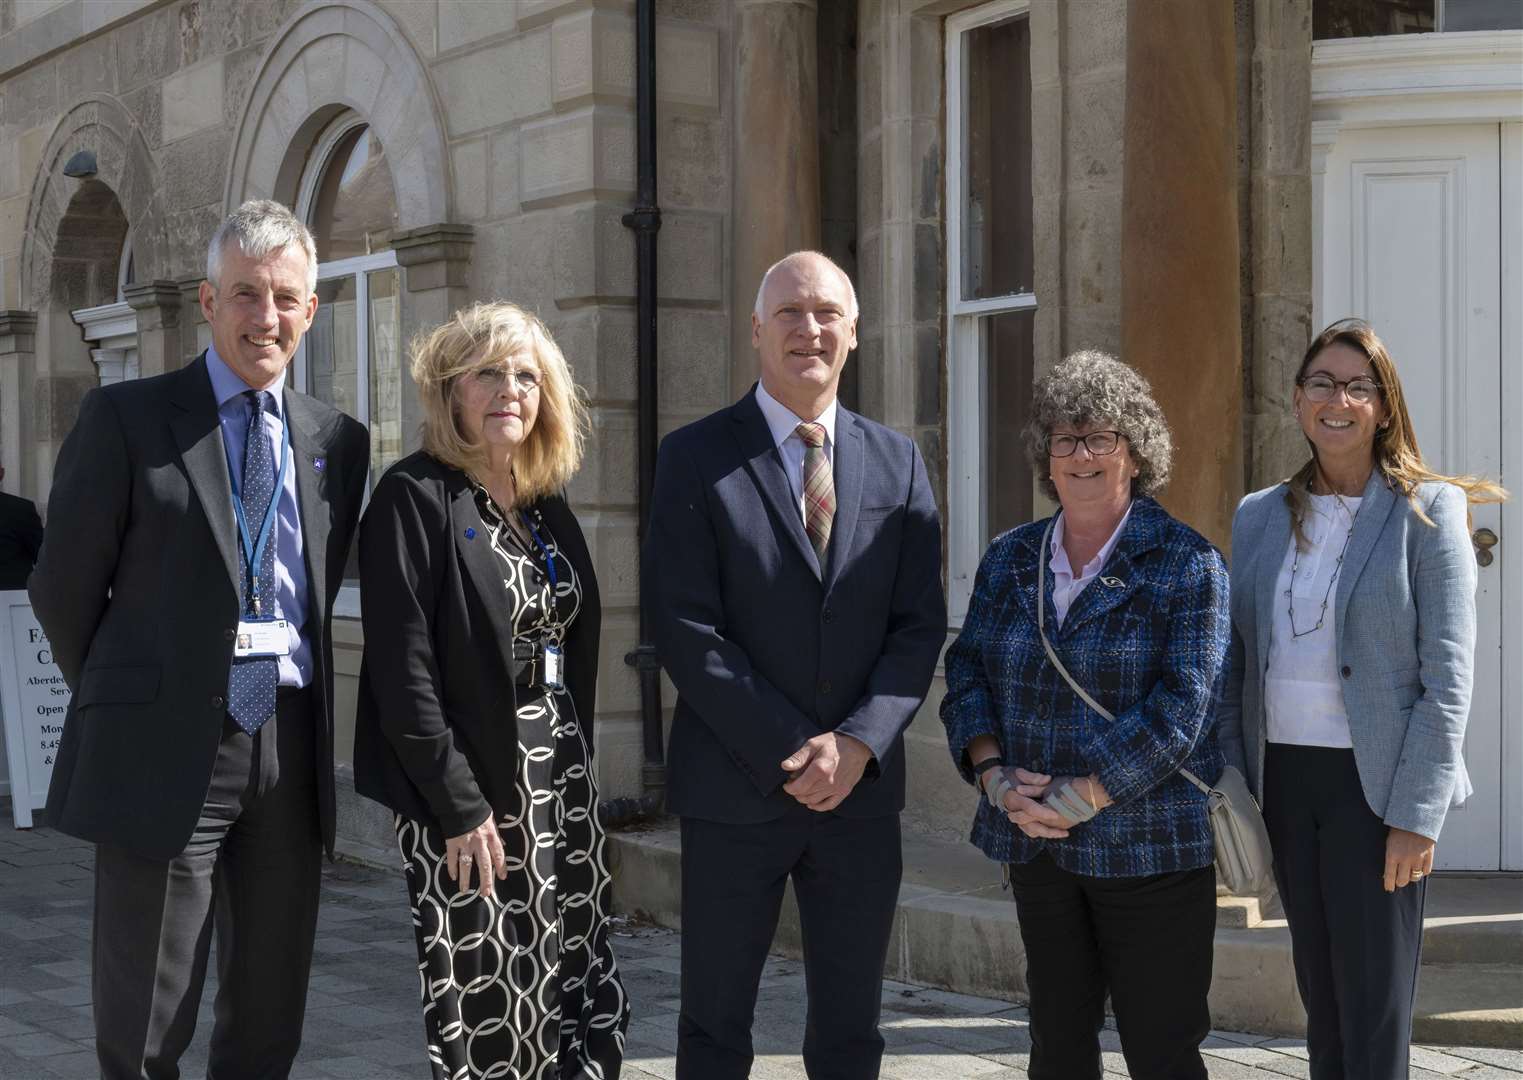 Minister Joe FitzPatrick (centre) is welcomed to Fraserburgh by Aberdeenshire Council chief executive Jim Savege, Banff and Buchan area committee chairwoman Councillor Doreen Mair, Council Leader Councillor Gillian Owen and Banff and Buchan area manager Angela Keith.